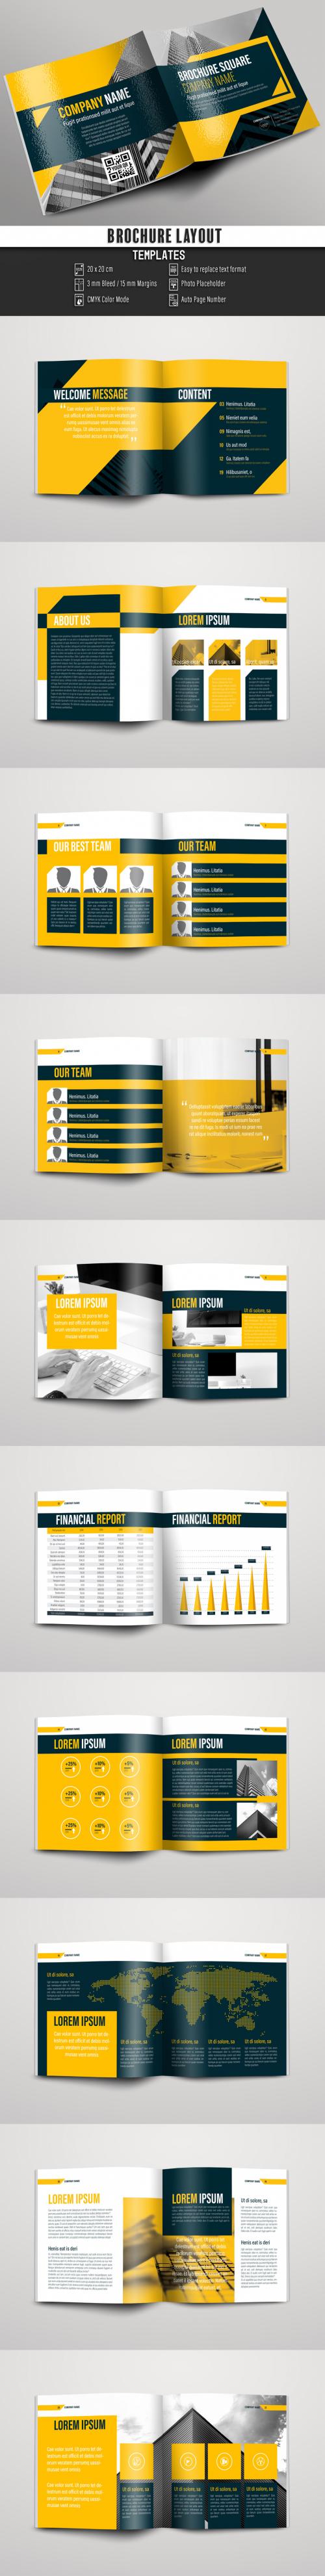 Yellow and Gray Square Brochure Layout - 180014119